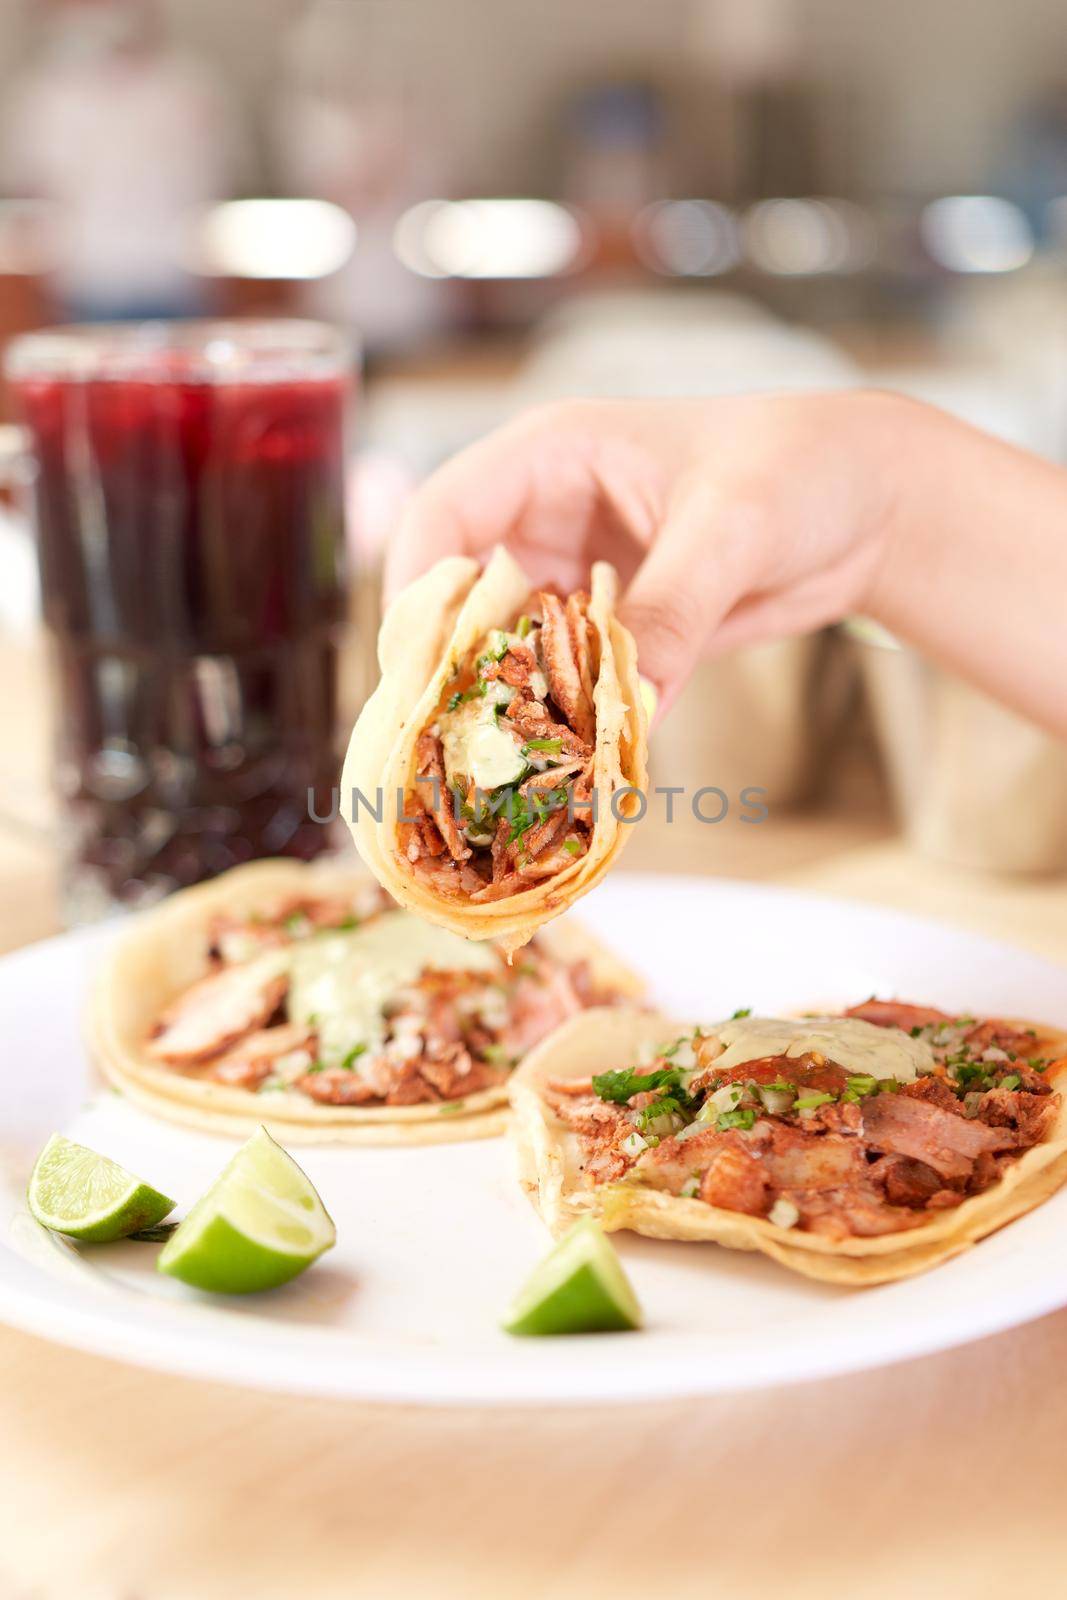 Girl eating delicious taco with salsa and a variety of toppings by JpRamos